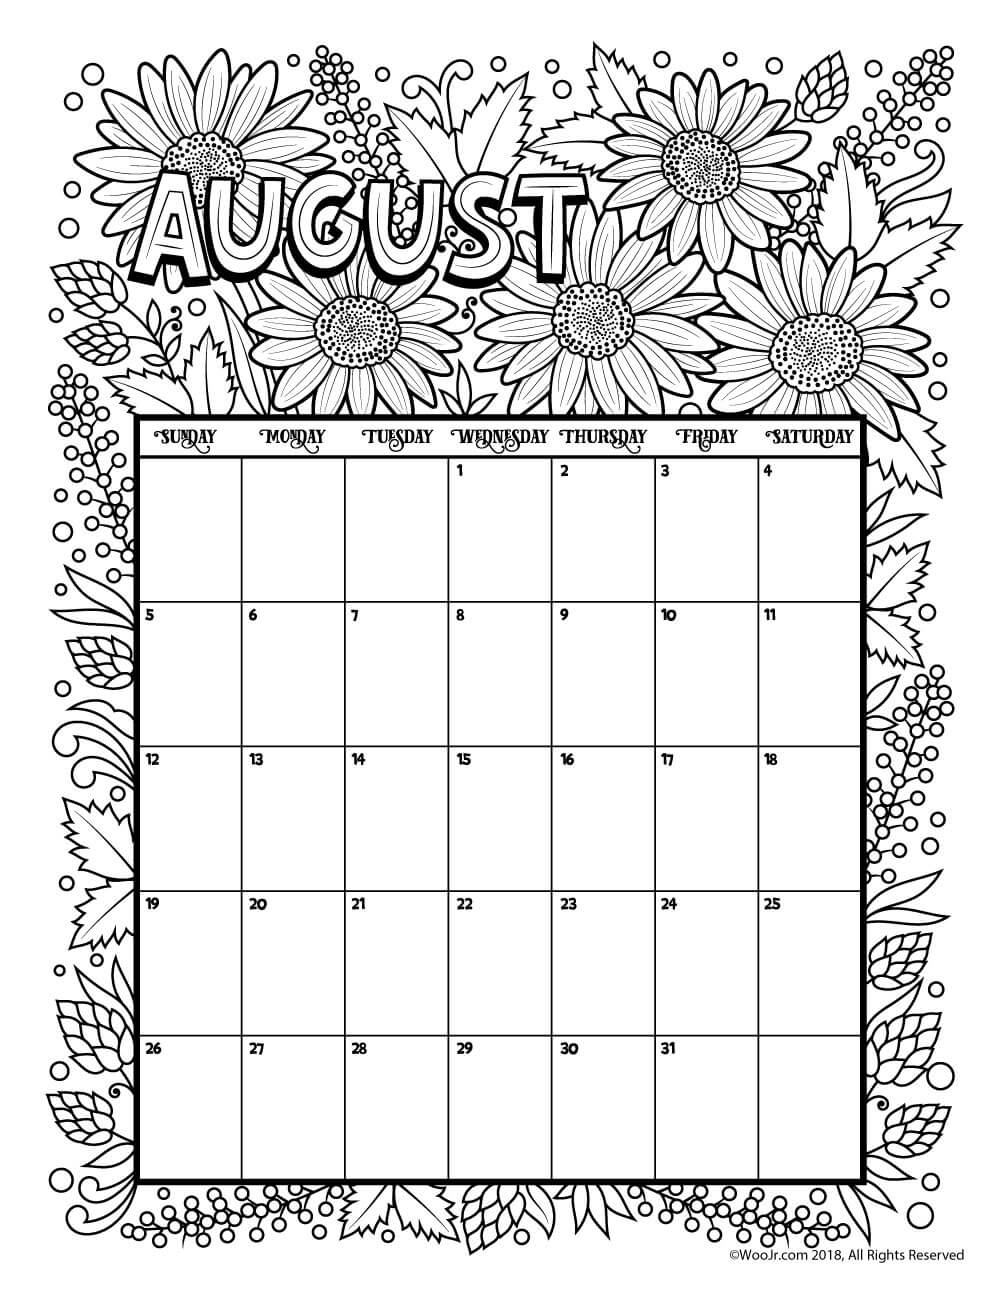 August Calendar Coloring Pages Coloring Cool